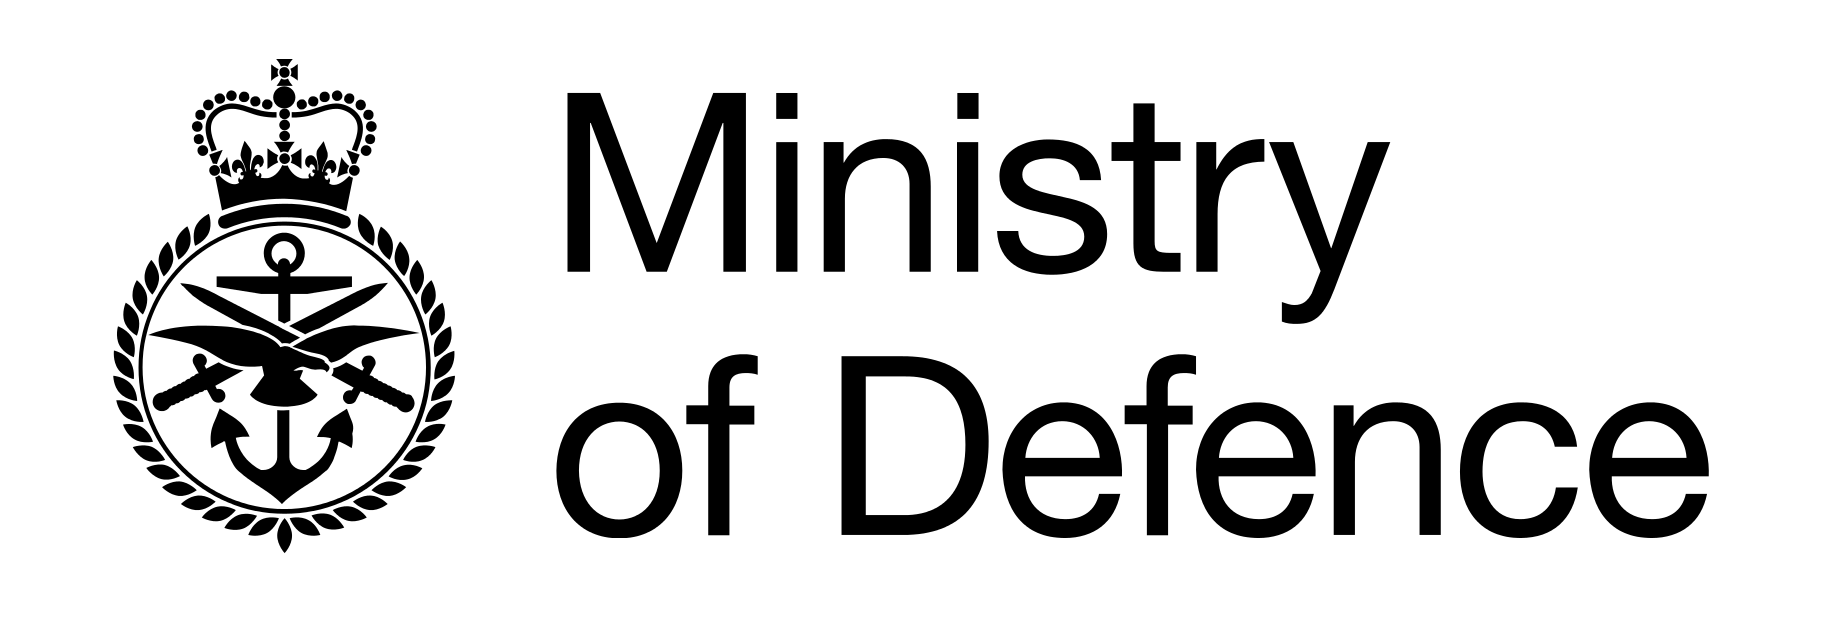 The Ministry of Defence logo